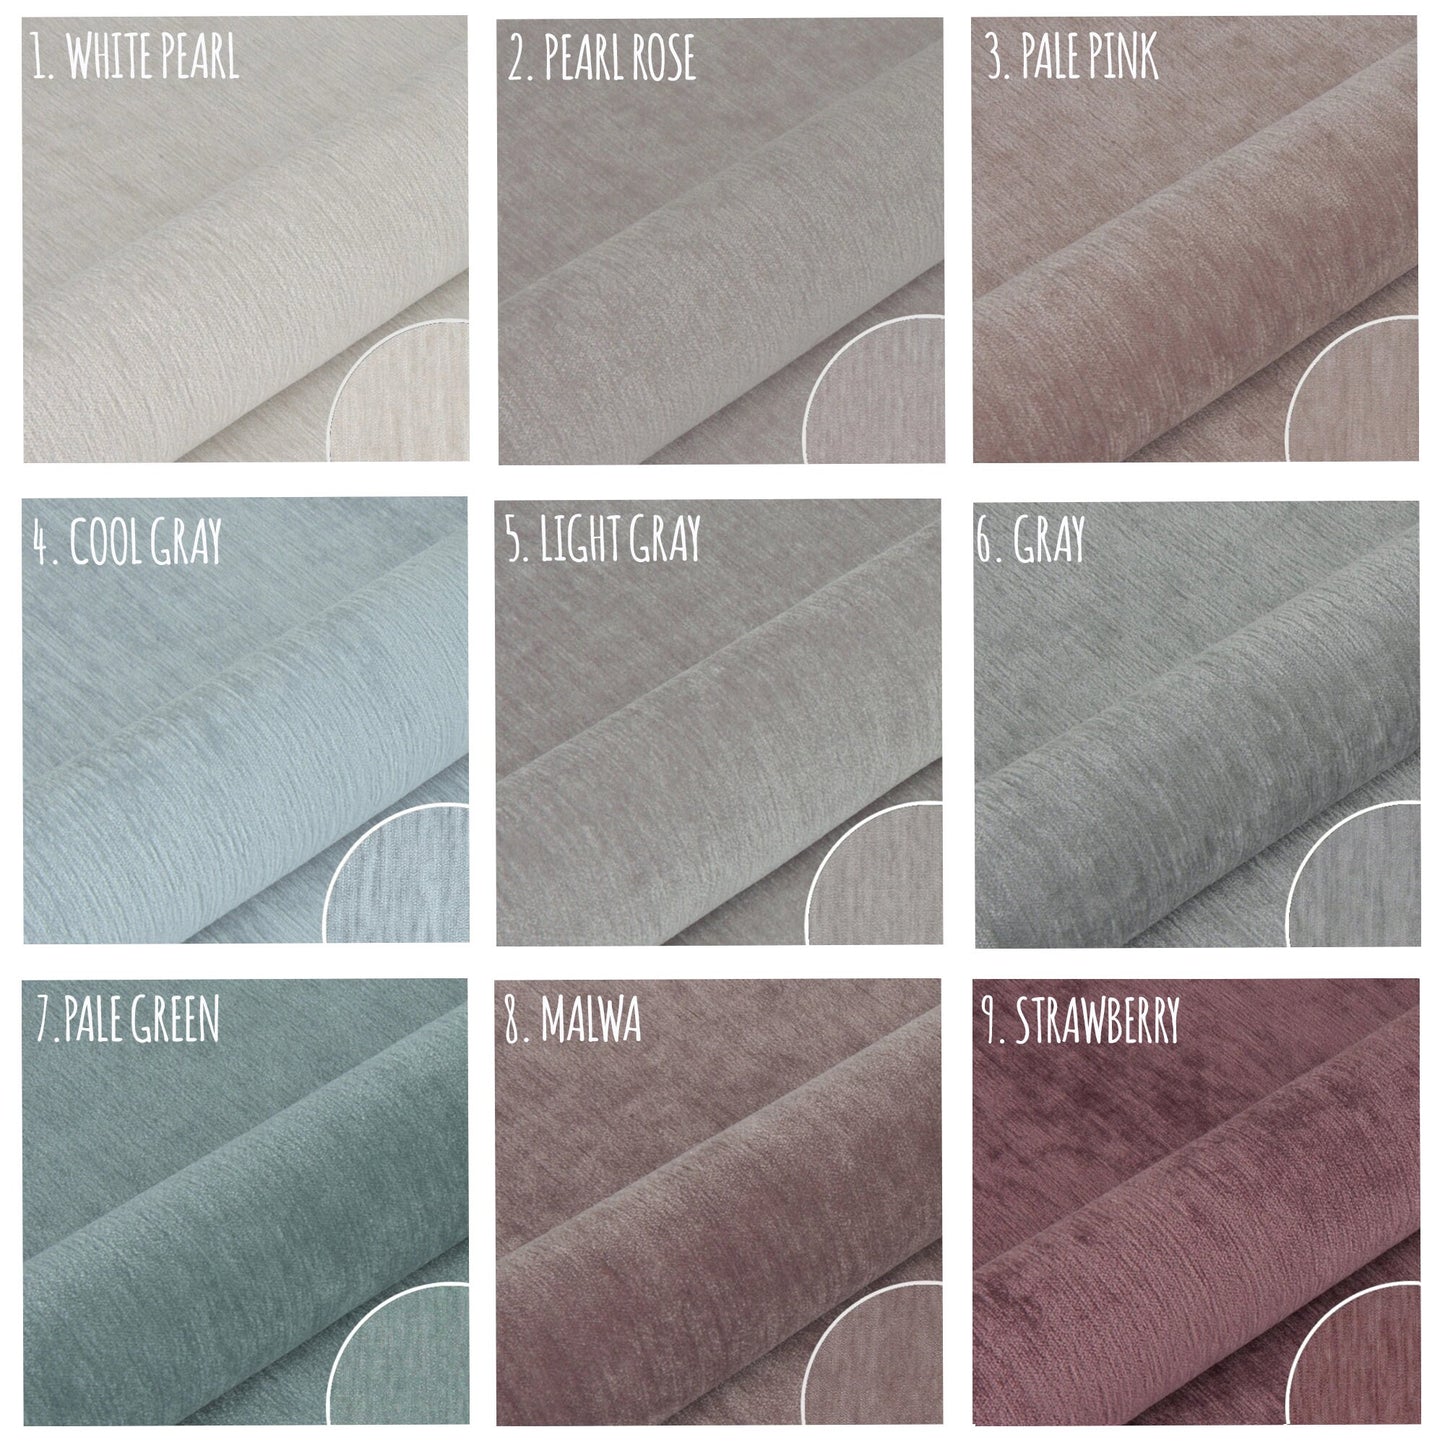 UPHOLSTERY FABRIC, pleasant to touch, furniture and decorations upholstery, durable material, diffrent colors, fabric by the meter / yard